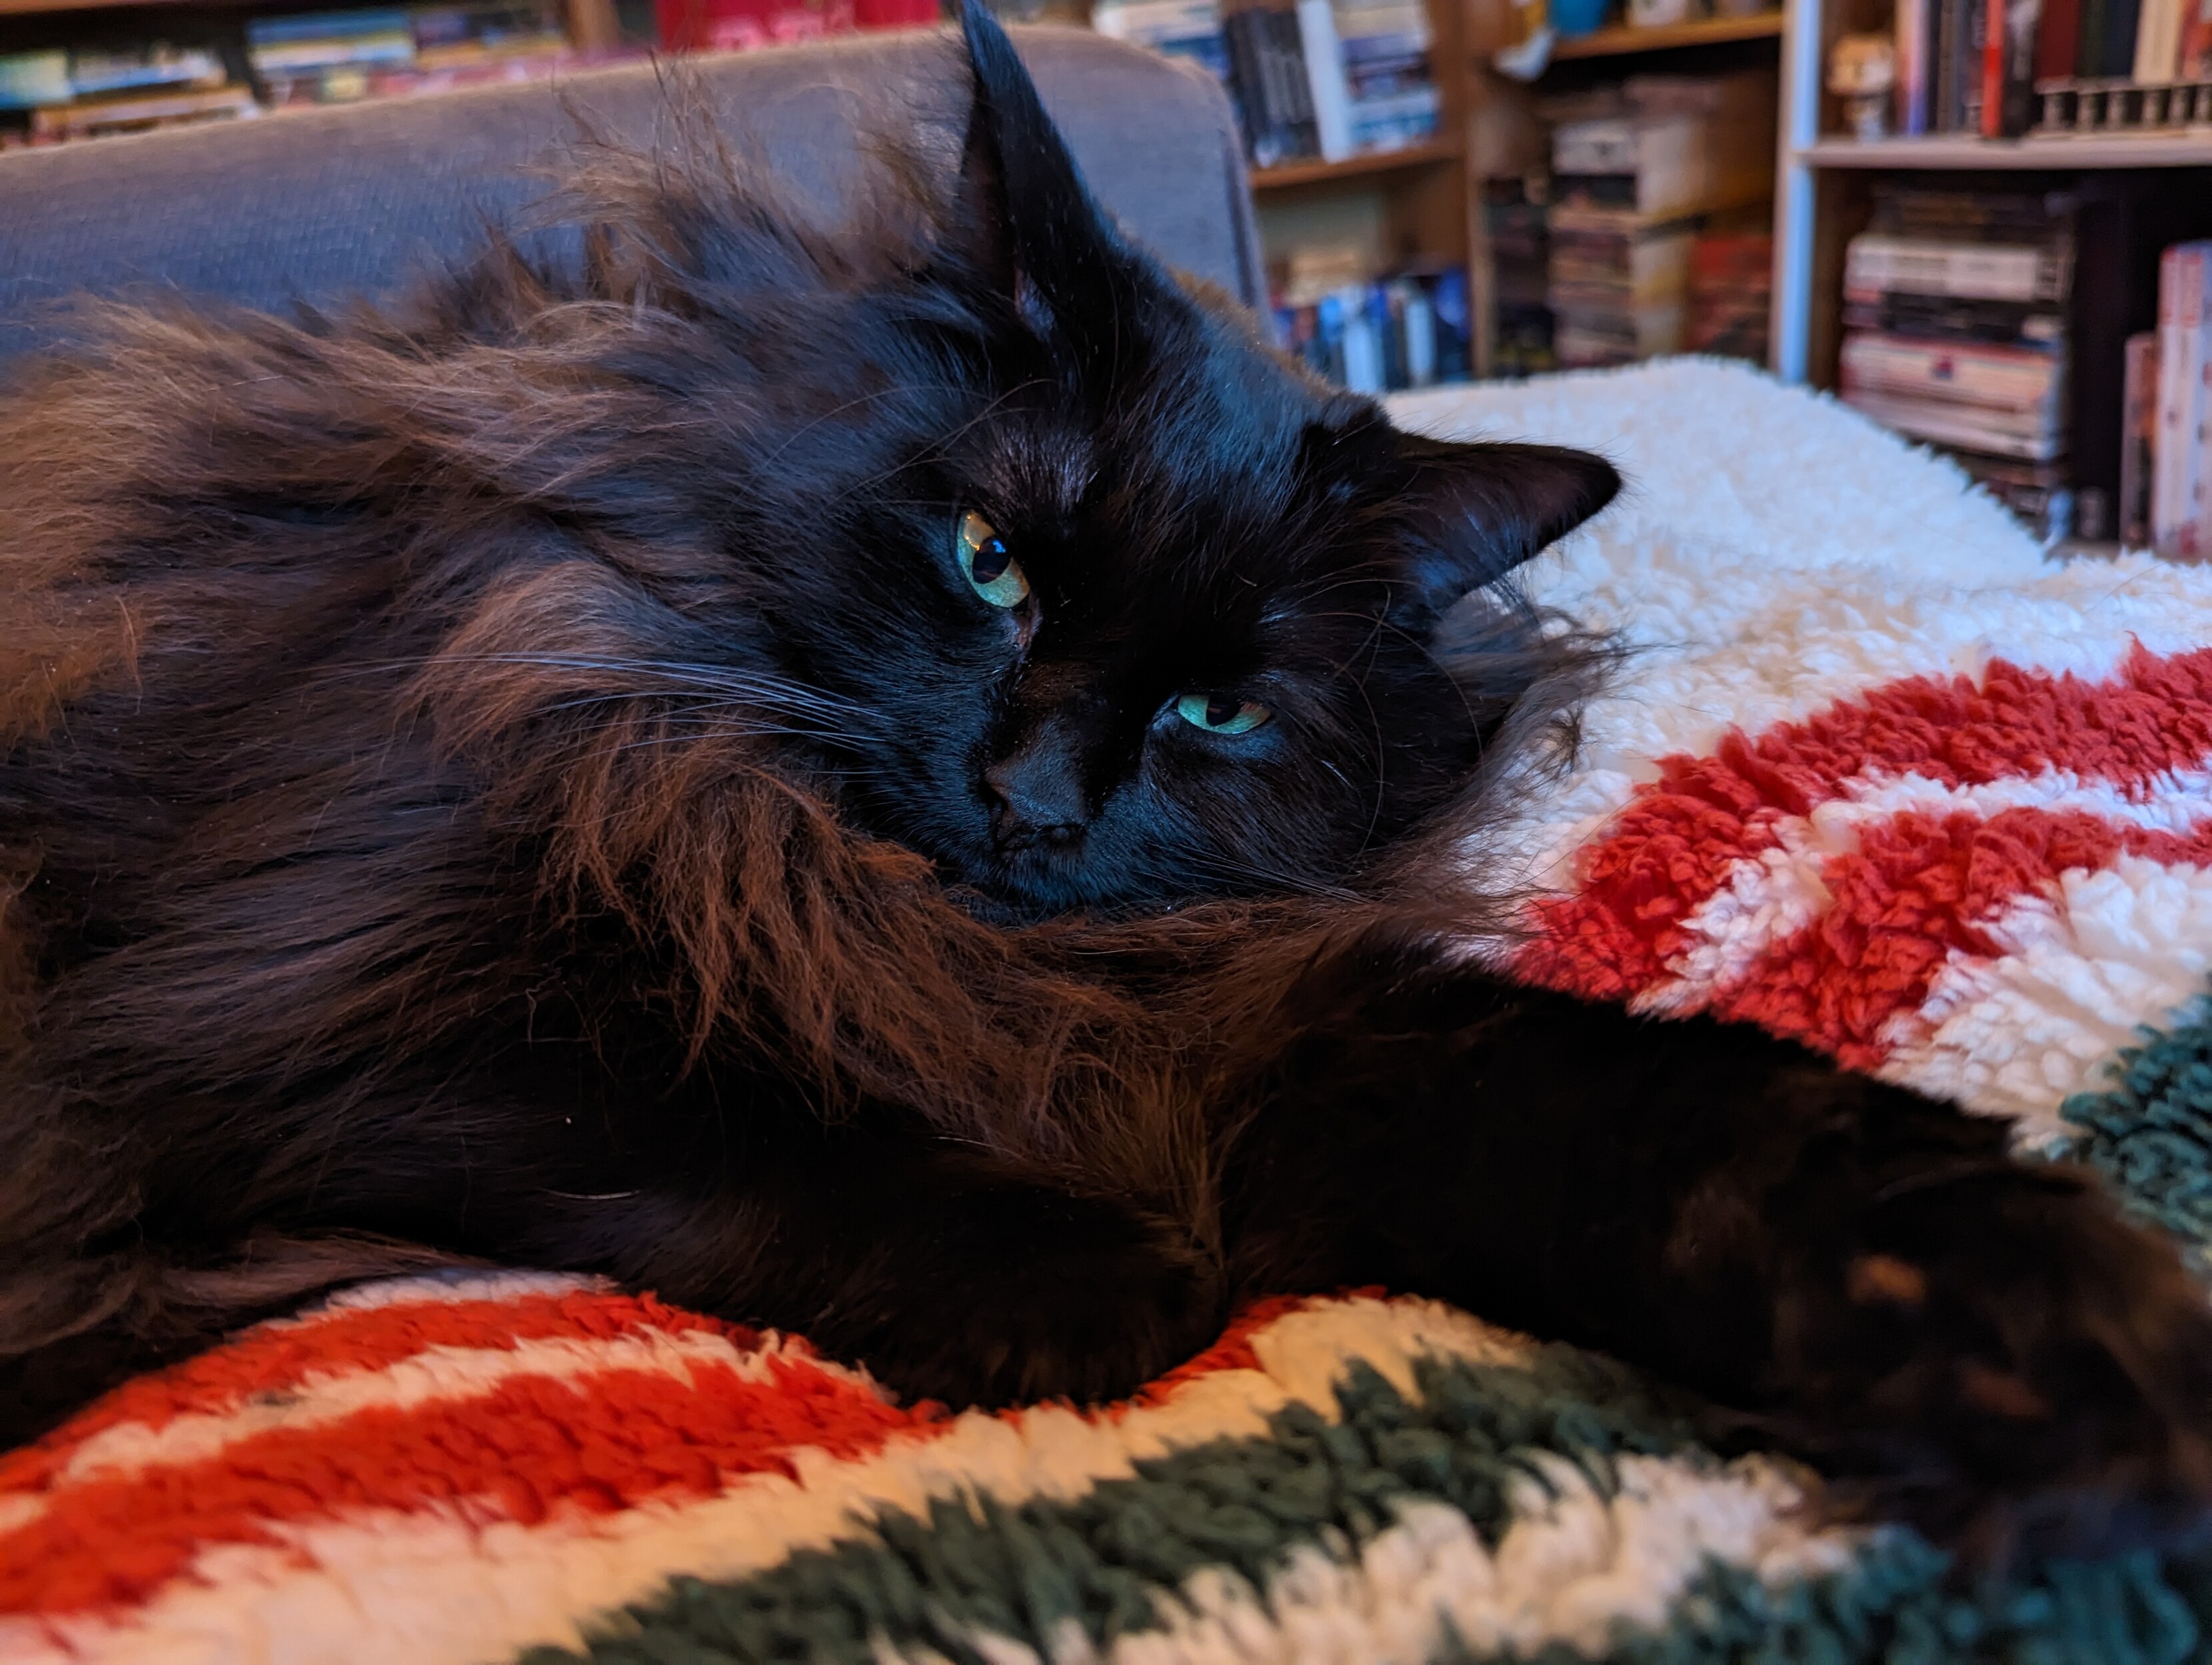 A very fluffy (slightly scruffy) black cat lying on a soft striped blanket, front paw stretching towards the camera